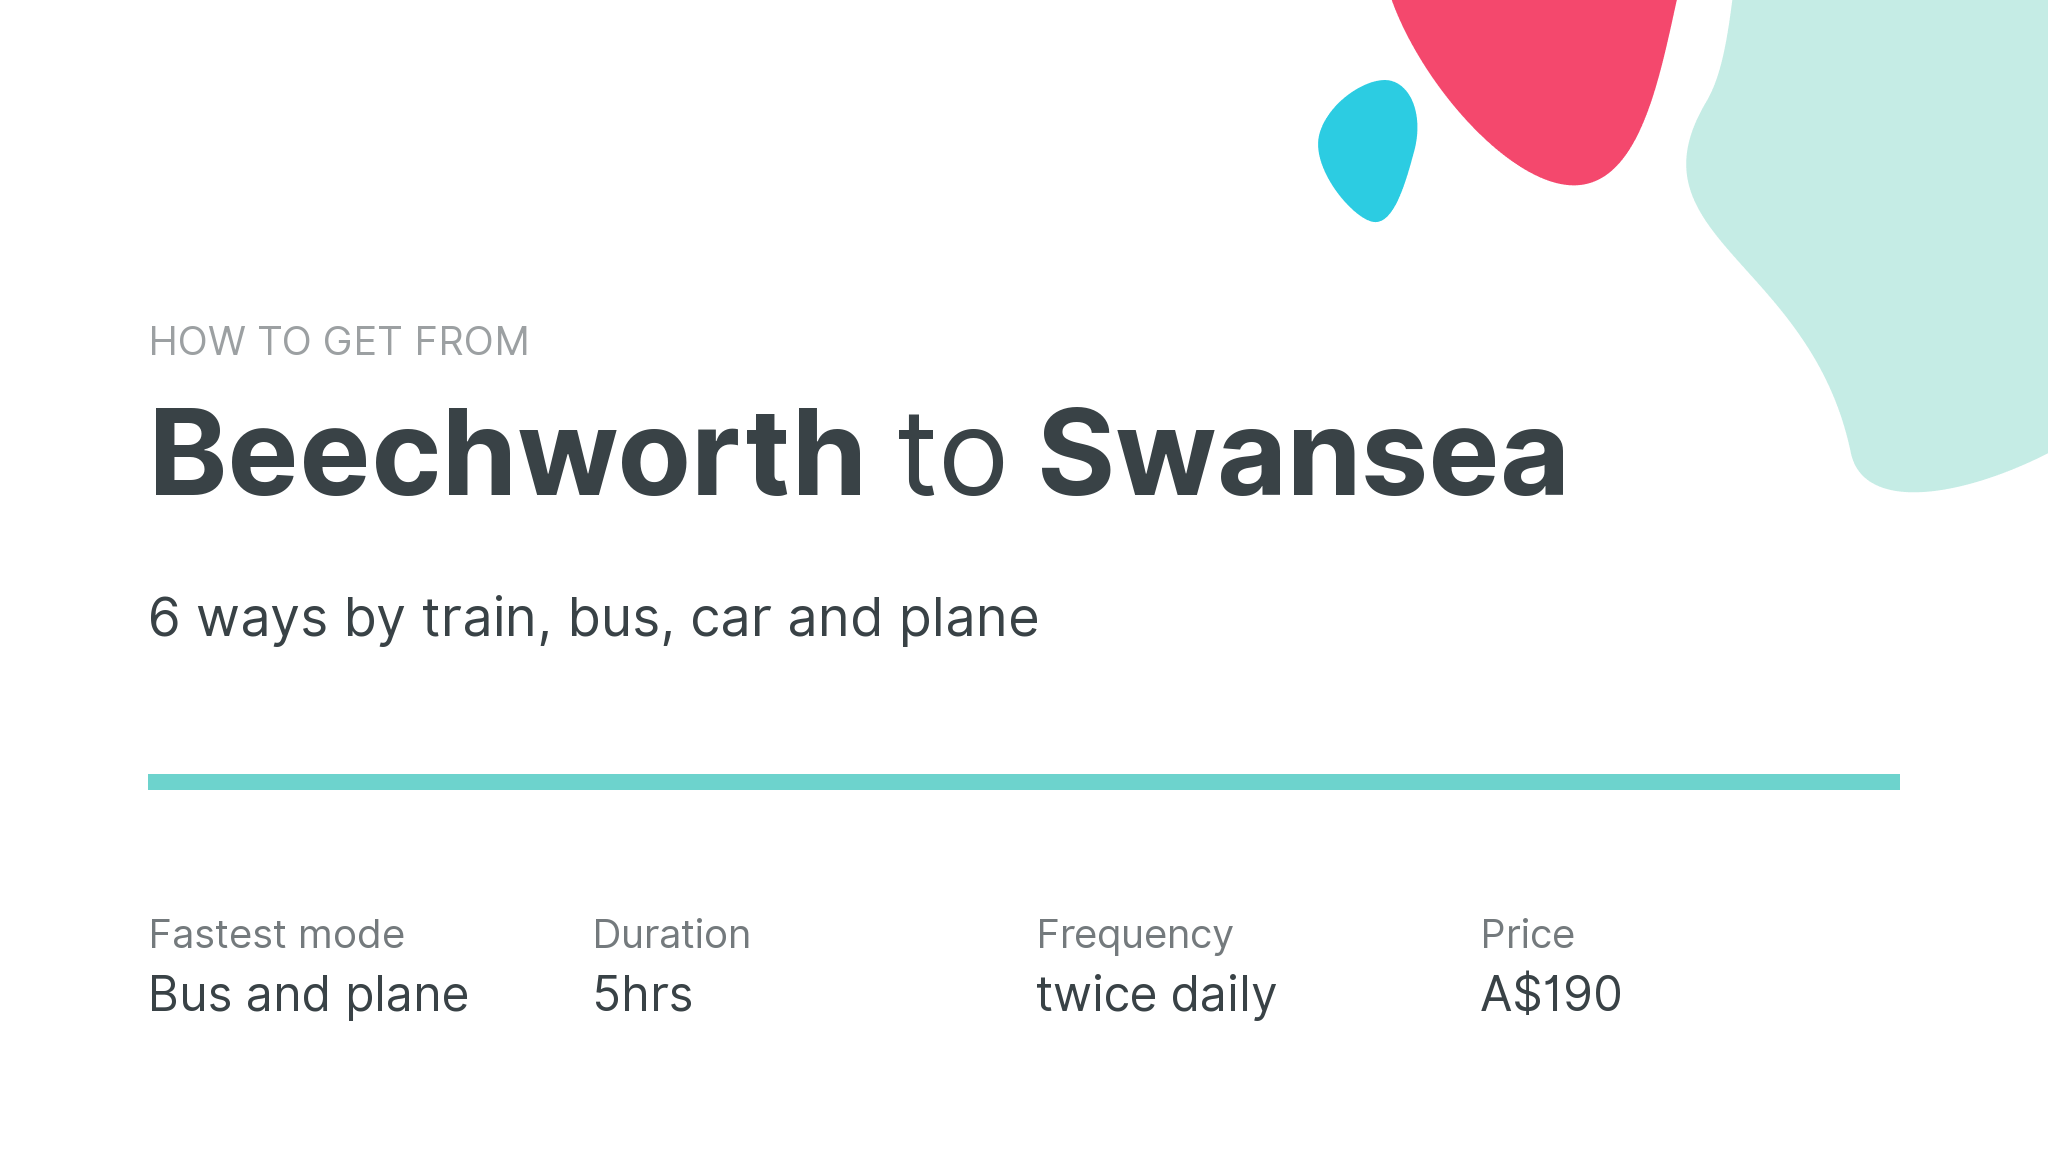 How do I get from Beechworth to Swansea